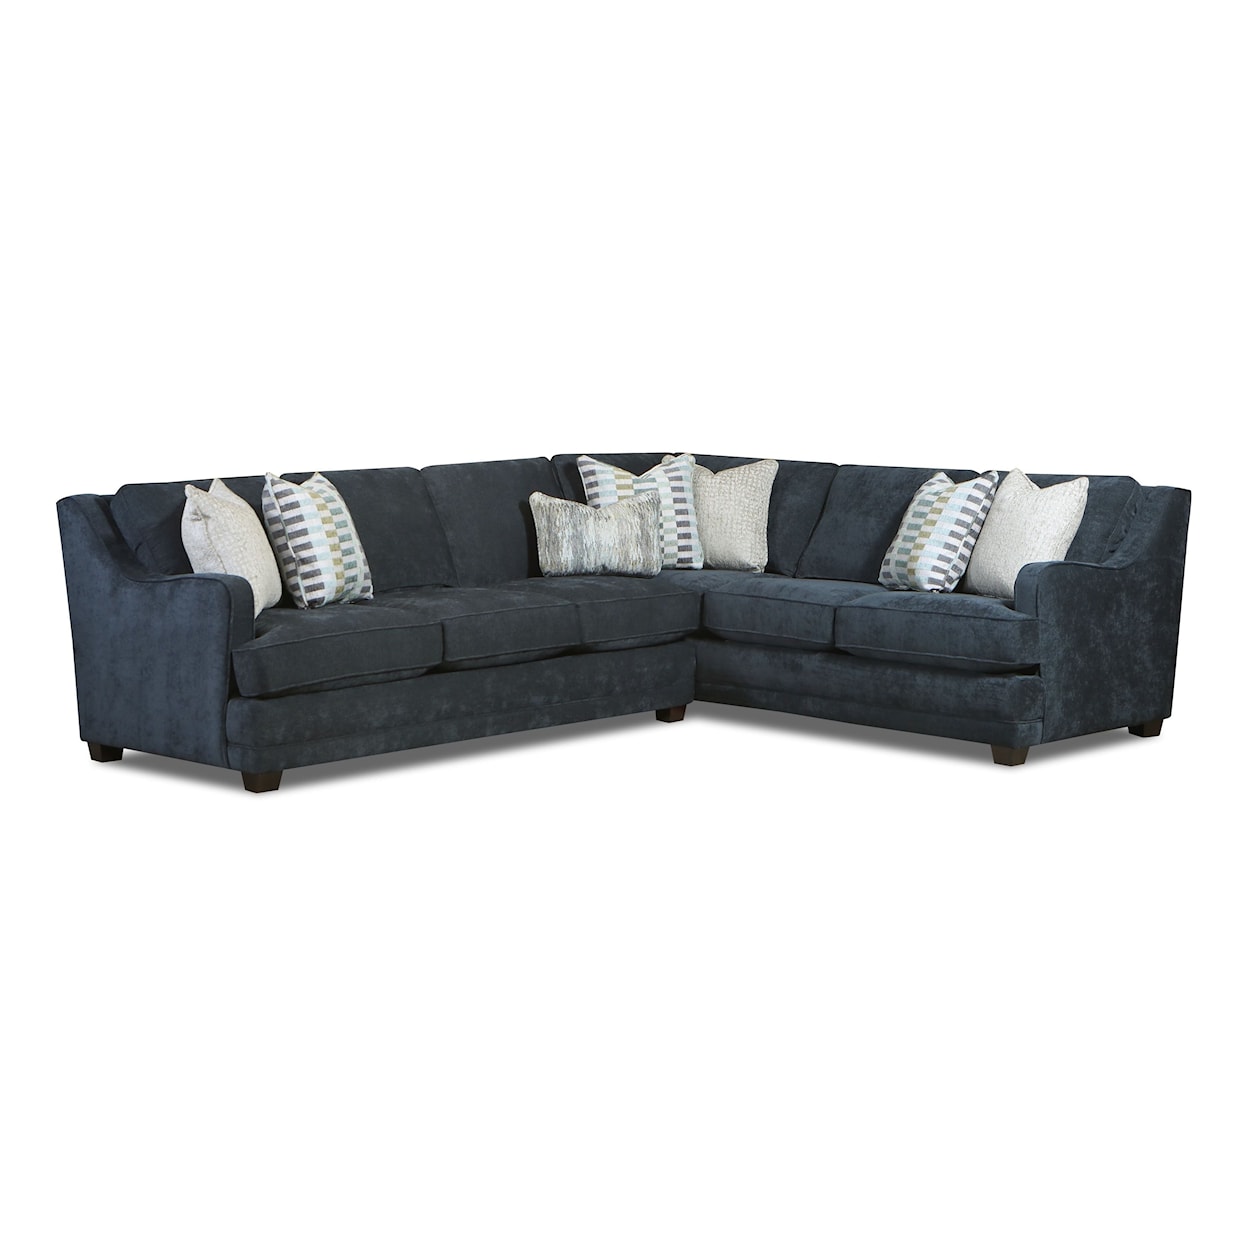 Fusion Furniture 7000 ELISE INK 2-Piece Sectional